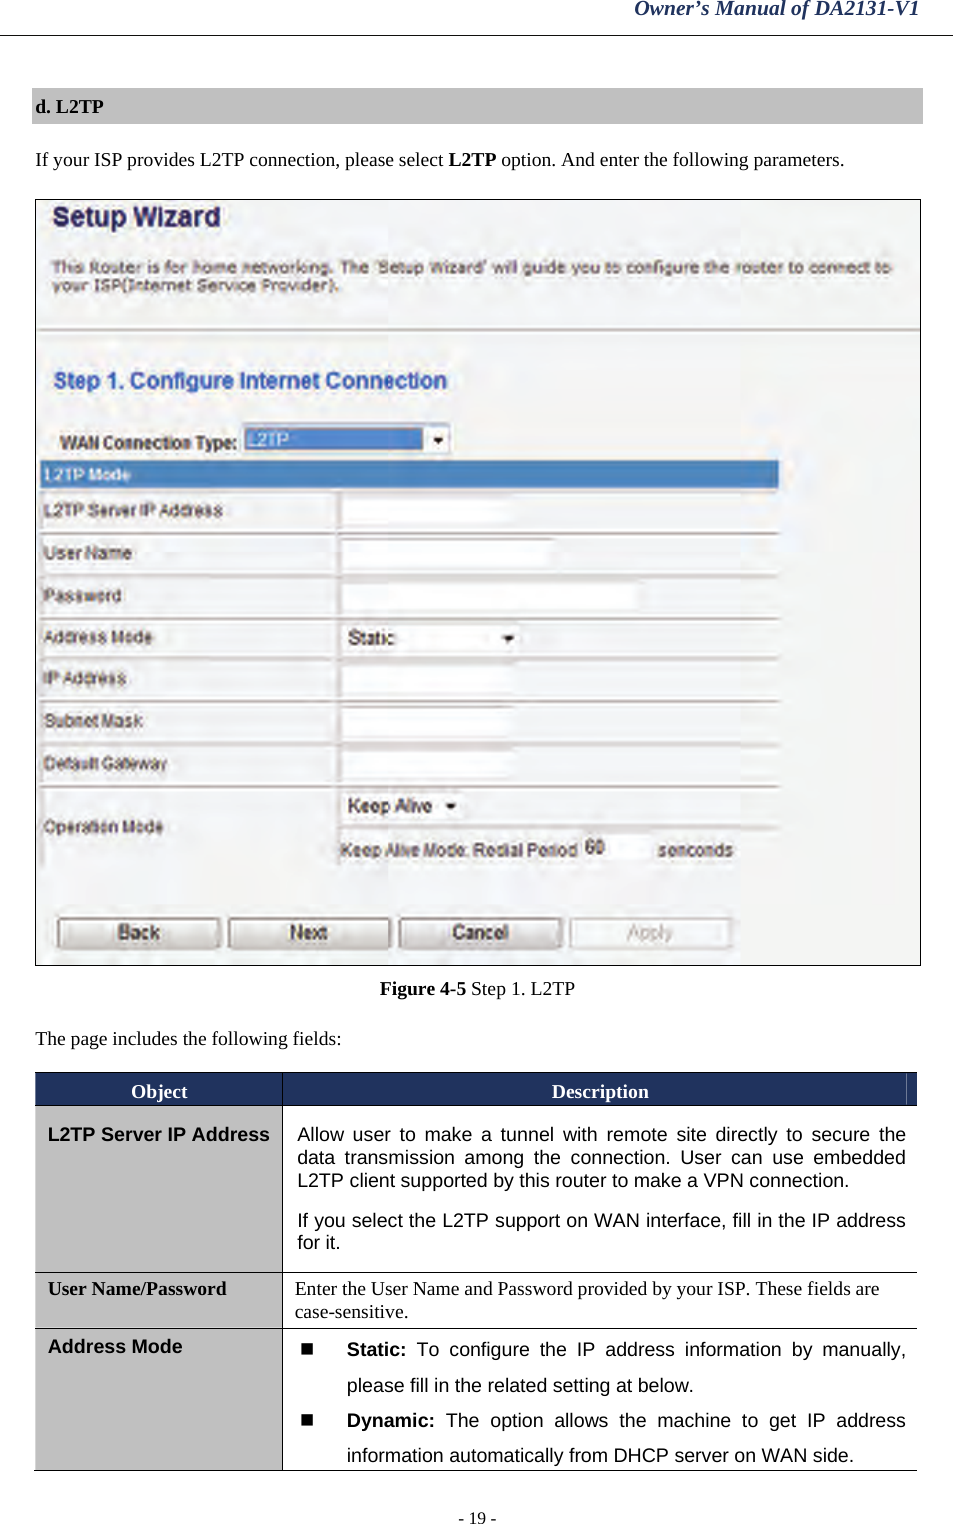 Owner’s Manual of DA2131-V1 - 19 -  d. L2TP If your ISP provides L2TP connection, please select L2TP option. And enter the following parameters.  Figure 4-5 Step 1. L2TP The page includes the following fields: Object  Description L2TP Server IP Address  Allow user to make a tunnel with remote site directly to secure the data transmission among the connection. User can use embedded L2TP client supported by this router to make a VPN connection. If you select the L2TP support on WAN interface, fill in the IP address for it. User Name/Password Enter the User Name and Password provided by your ISP. These fields are case-sensitive. Address Mode   Static: To configure the IP address information by manually, please fill in the related setting at below.  Dynamic:  The option allows the machine to get IP address information automatically from DHCP server on WAN side. 